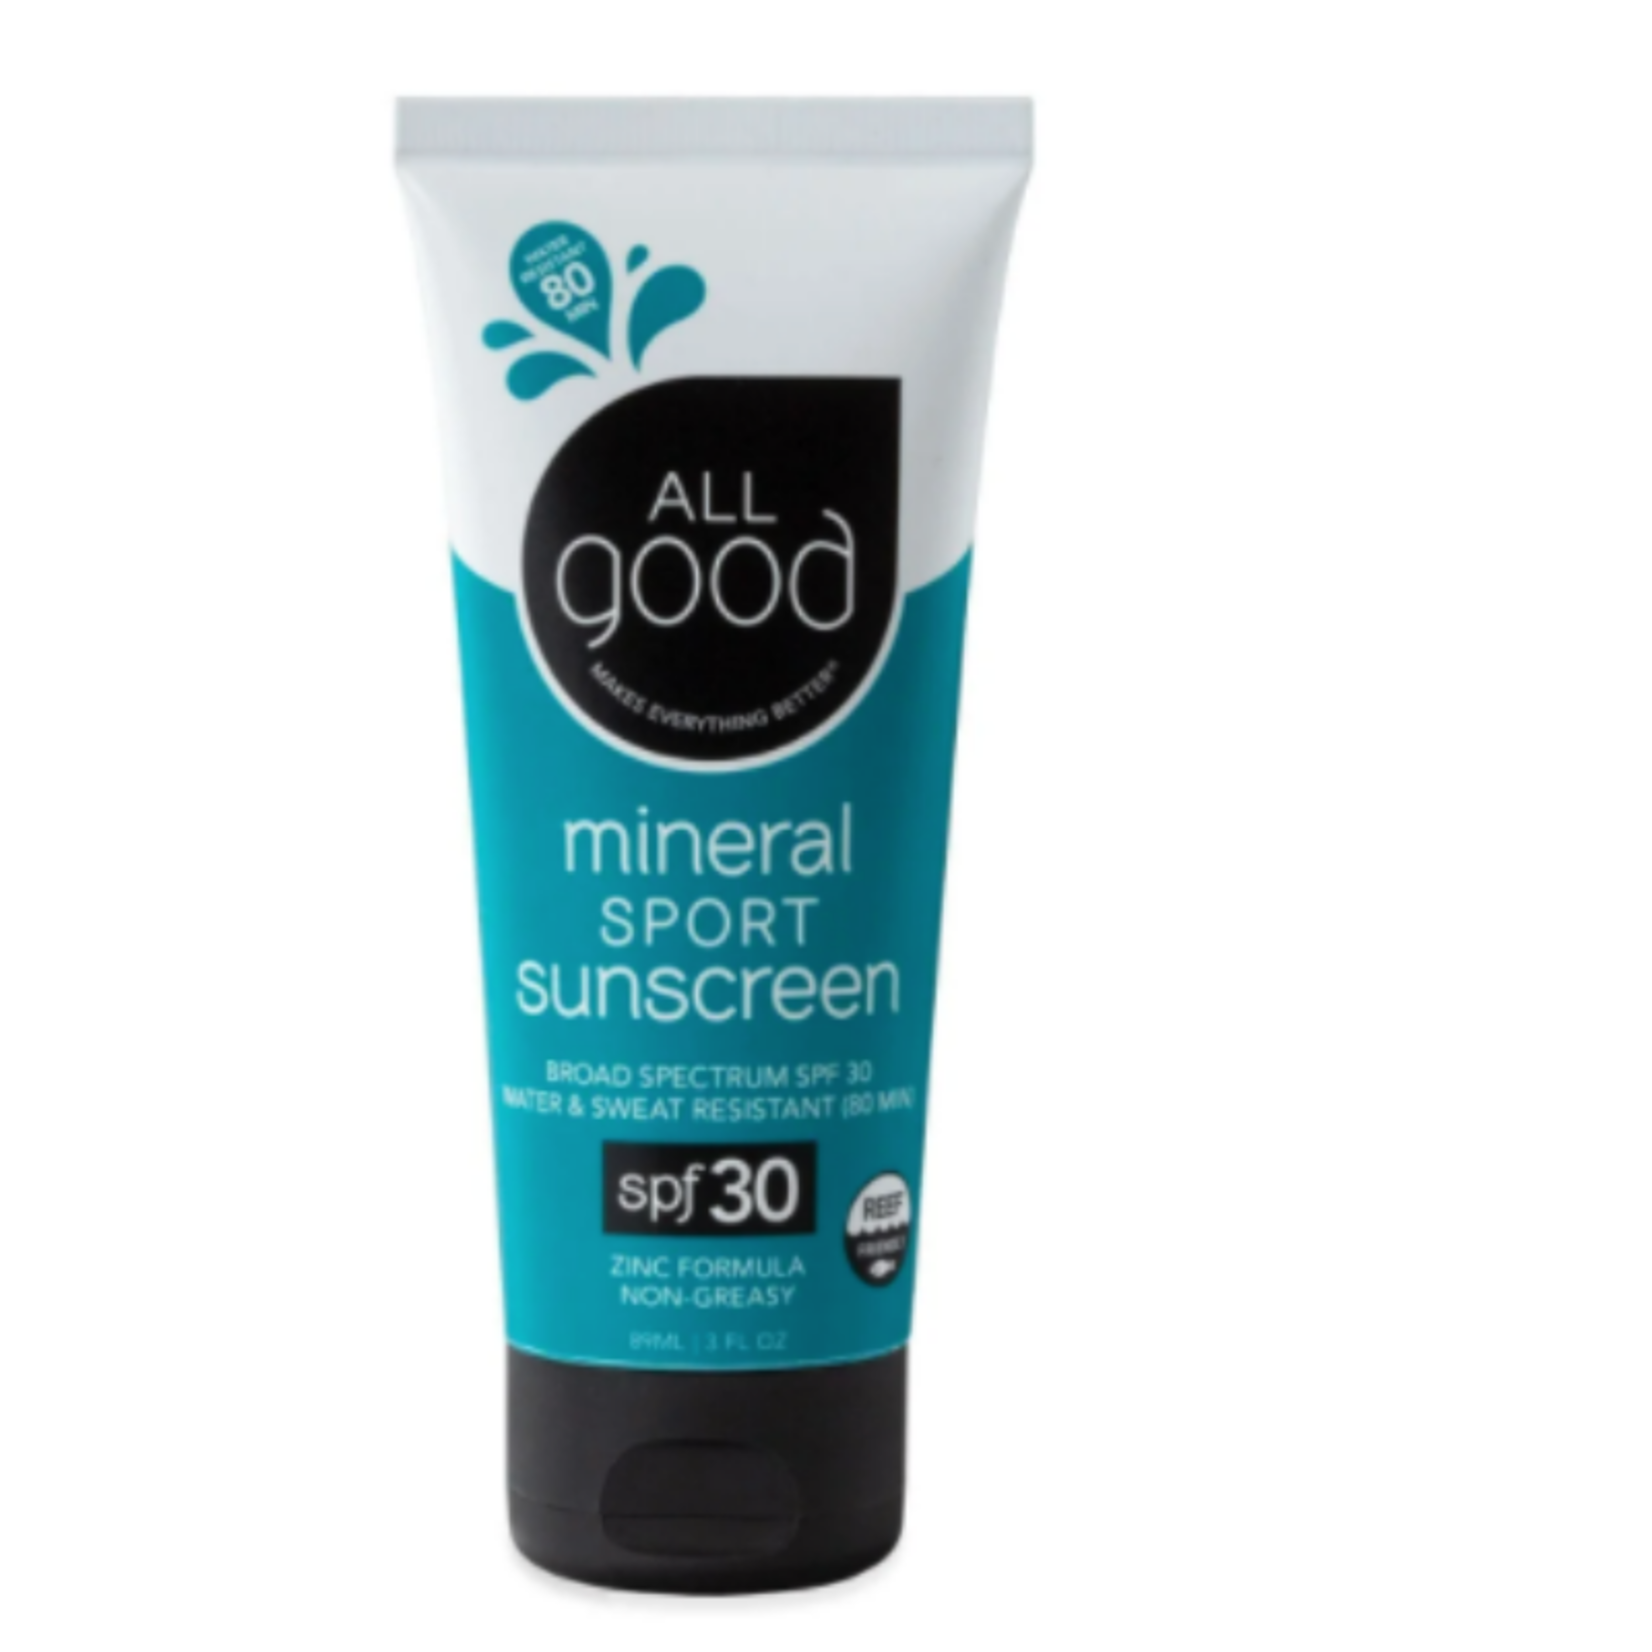 All Good All Good SPF 30 Sport Mineral Sunscreen Lotion, 3 oz.